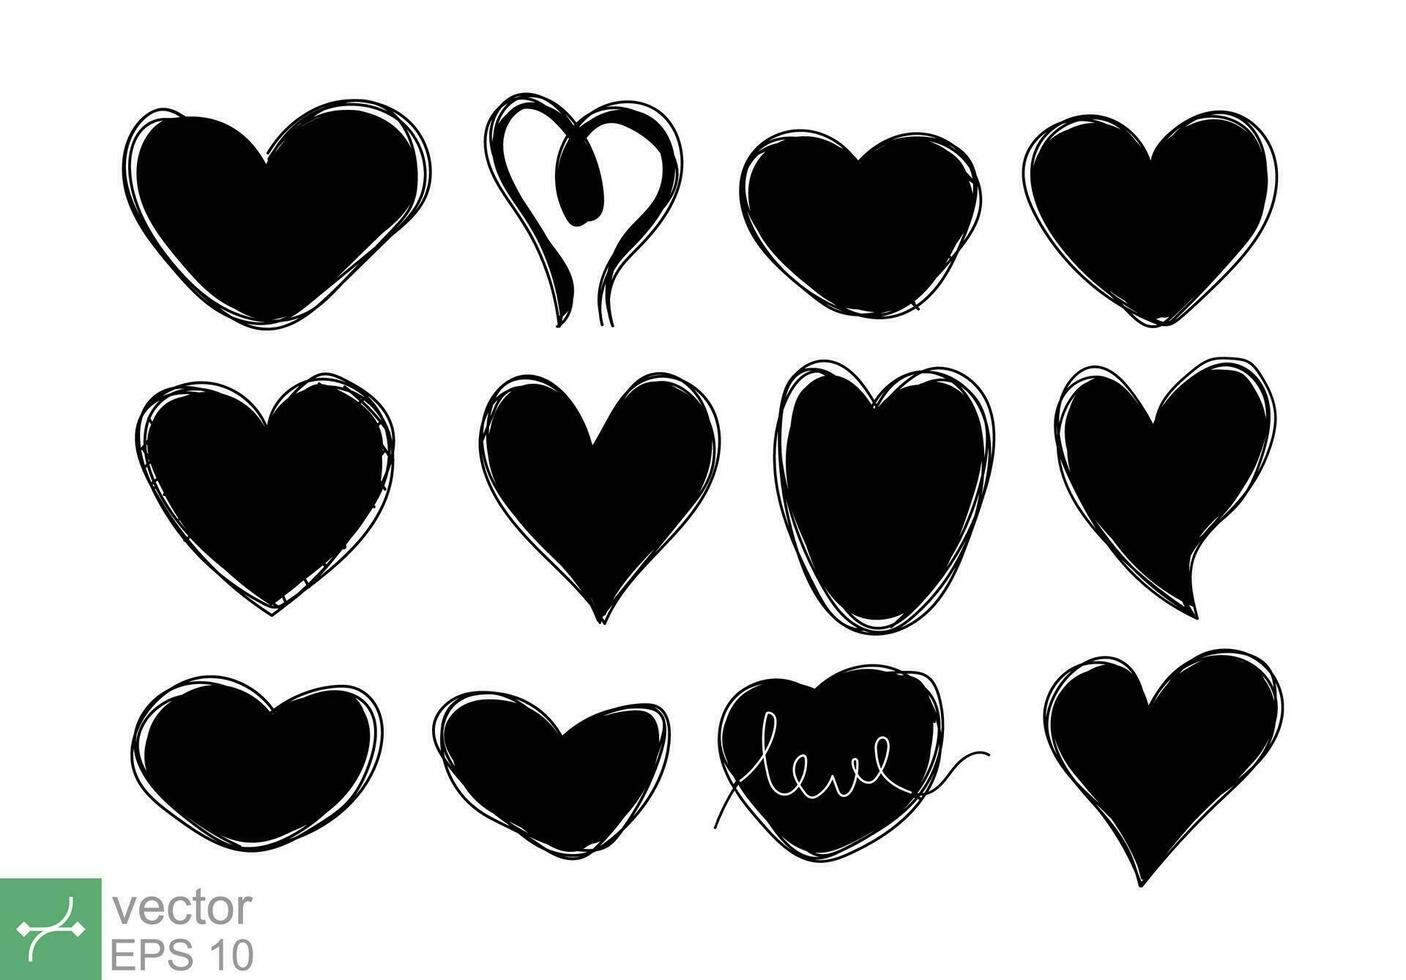 Grunge hearts black and white icon. Heart line sketch, hand drawn style. Wedding, love, frame element design. Vector illustration isolated on white background. EPS 10.